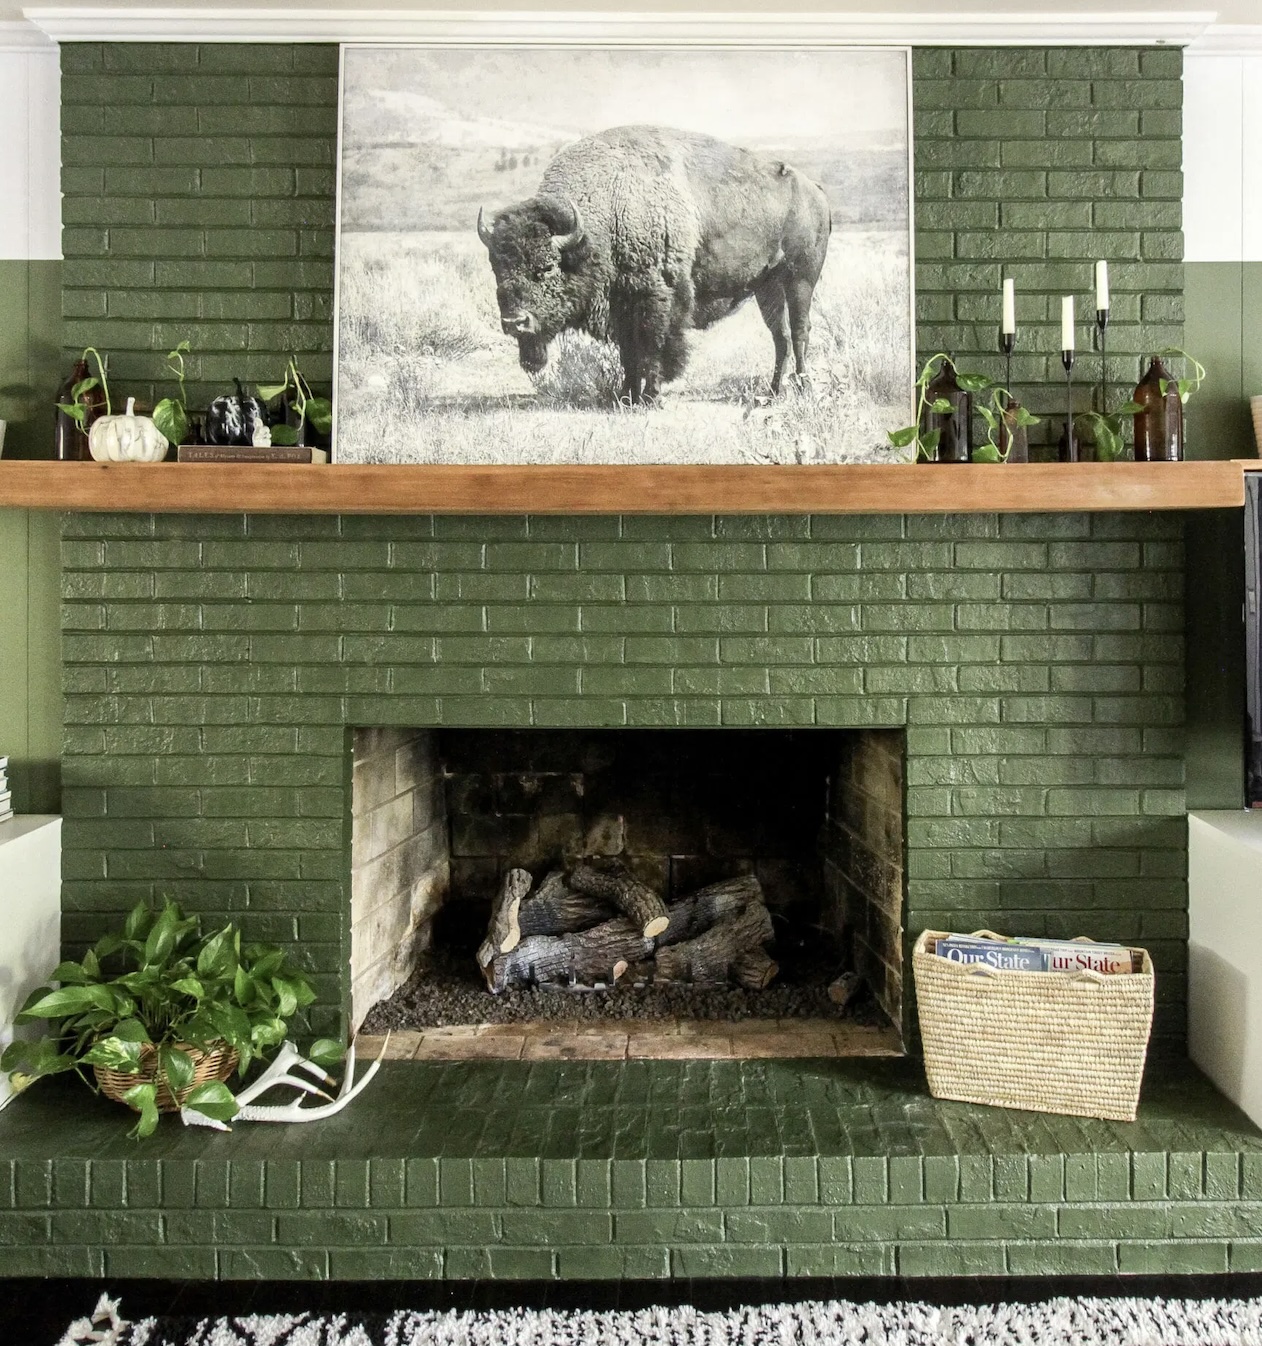 PORTLAND LIFE: STYLE UP YOUR FIREPLACE